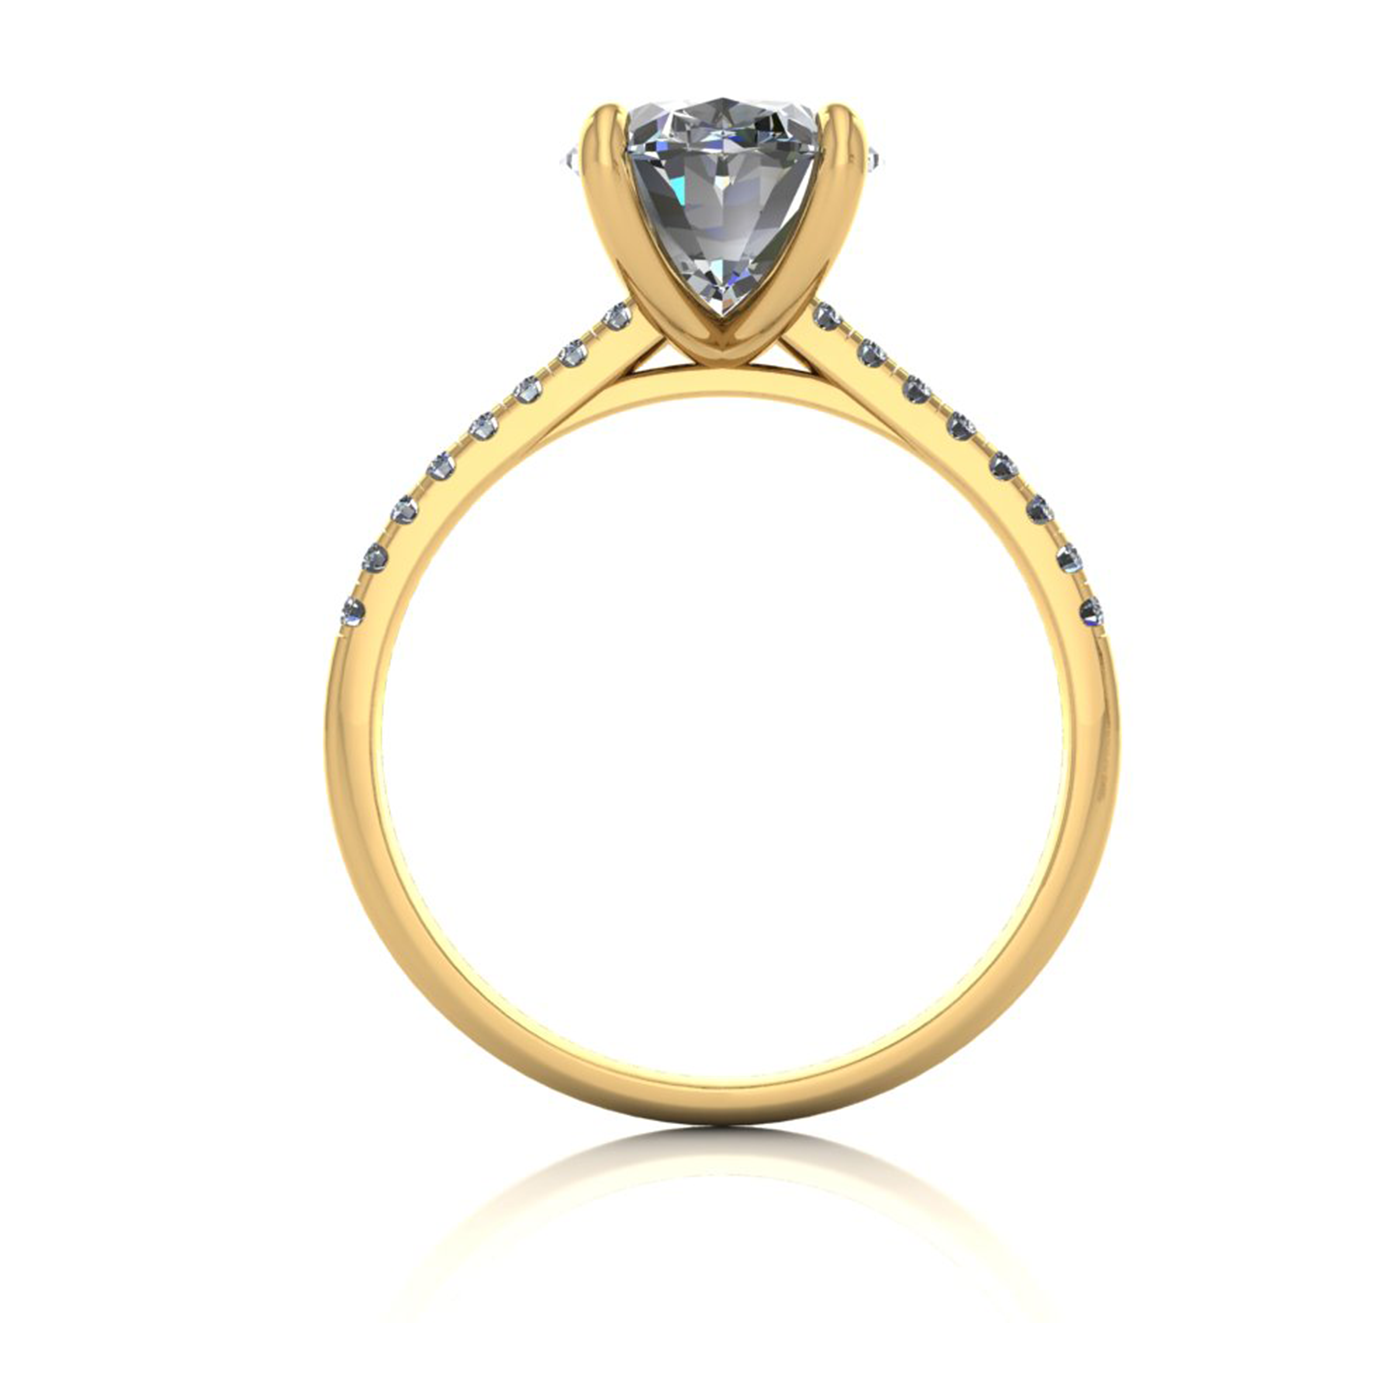 18k yellow gold  2,50 ct 4 prongs oval cut diamond engagement ring with whisper thin pavÉ set band Photos & images